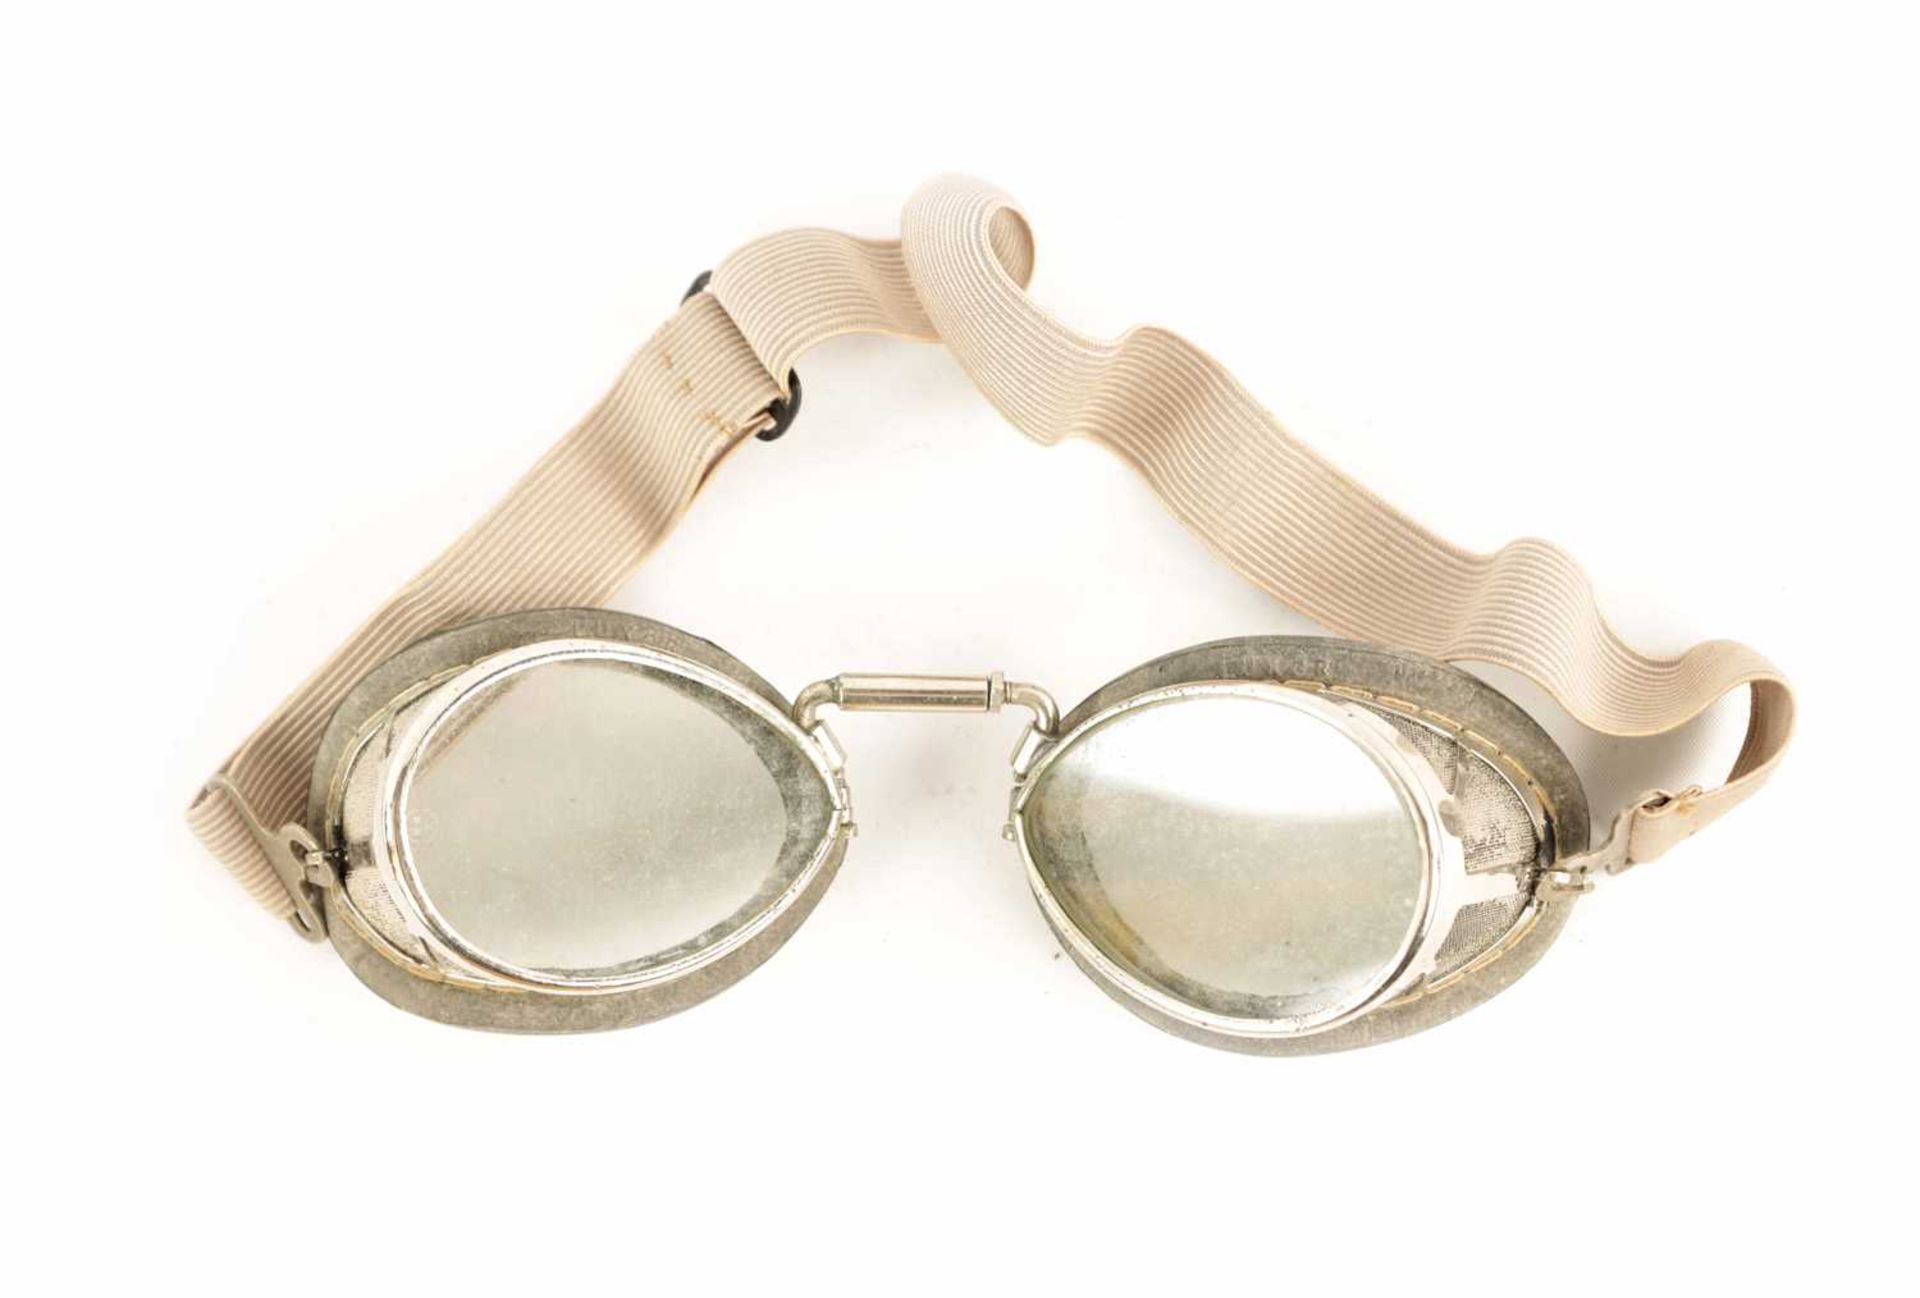 A PAIR OF E.B.MEYROWITZ DRIVING GOGGLES